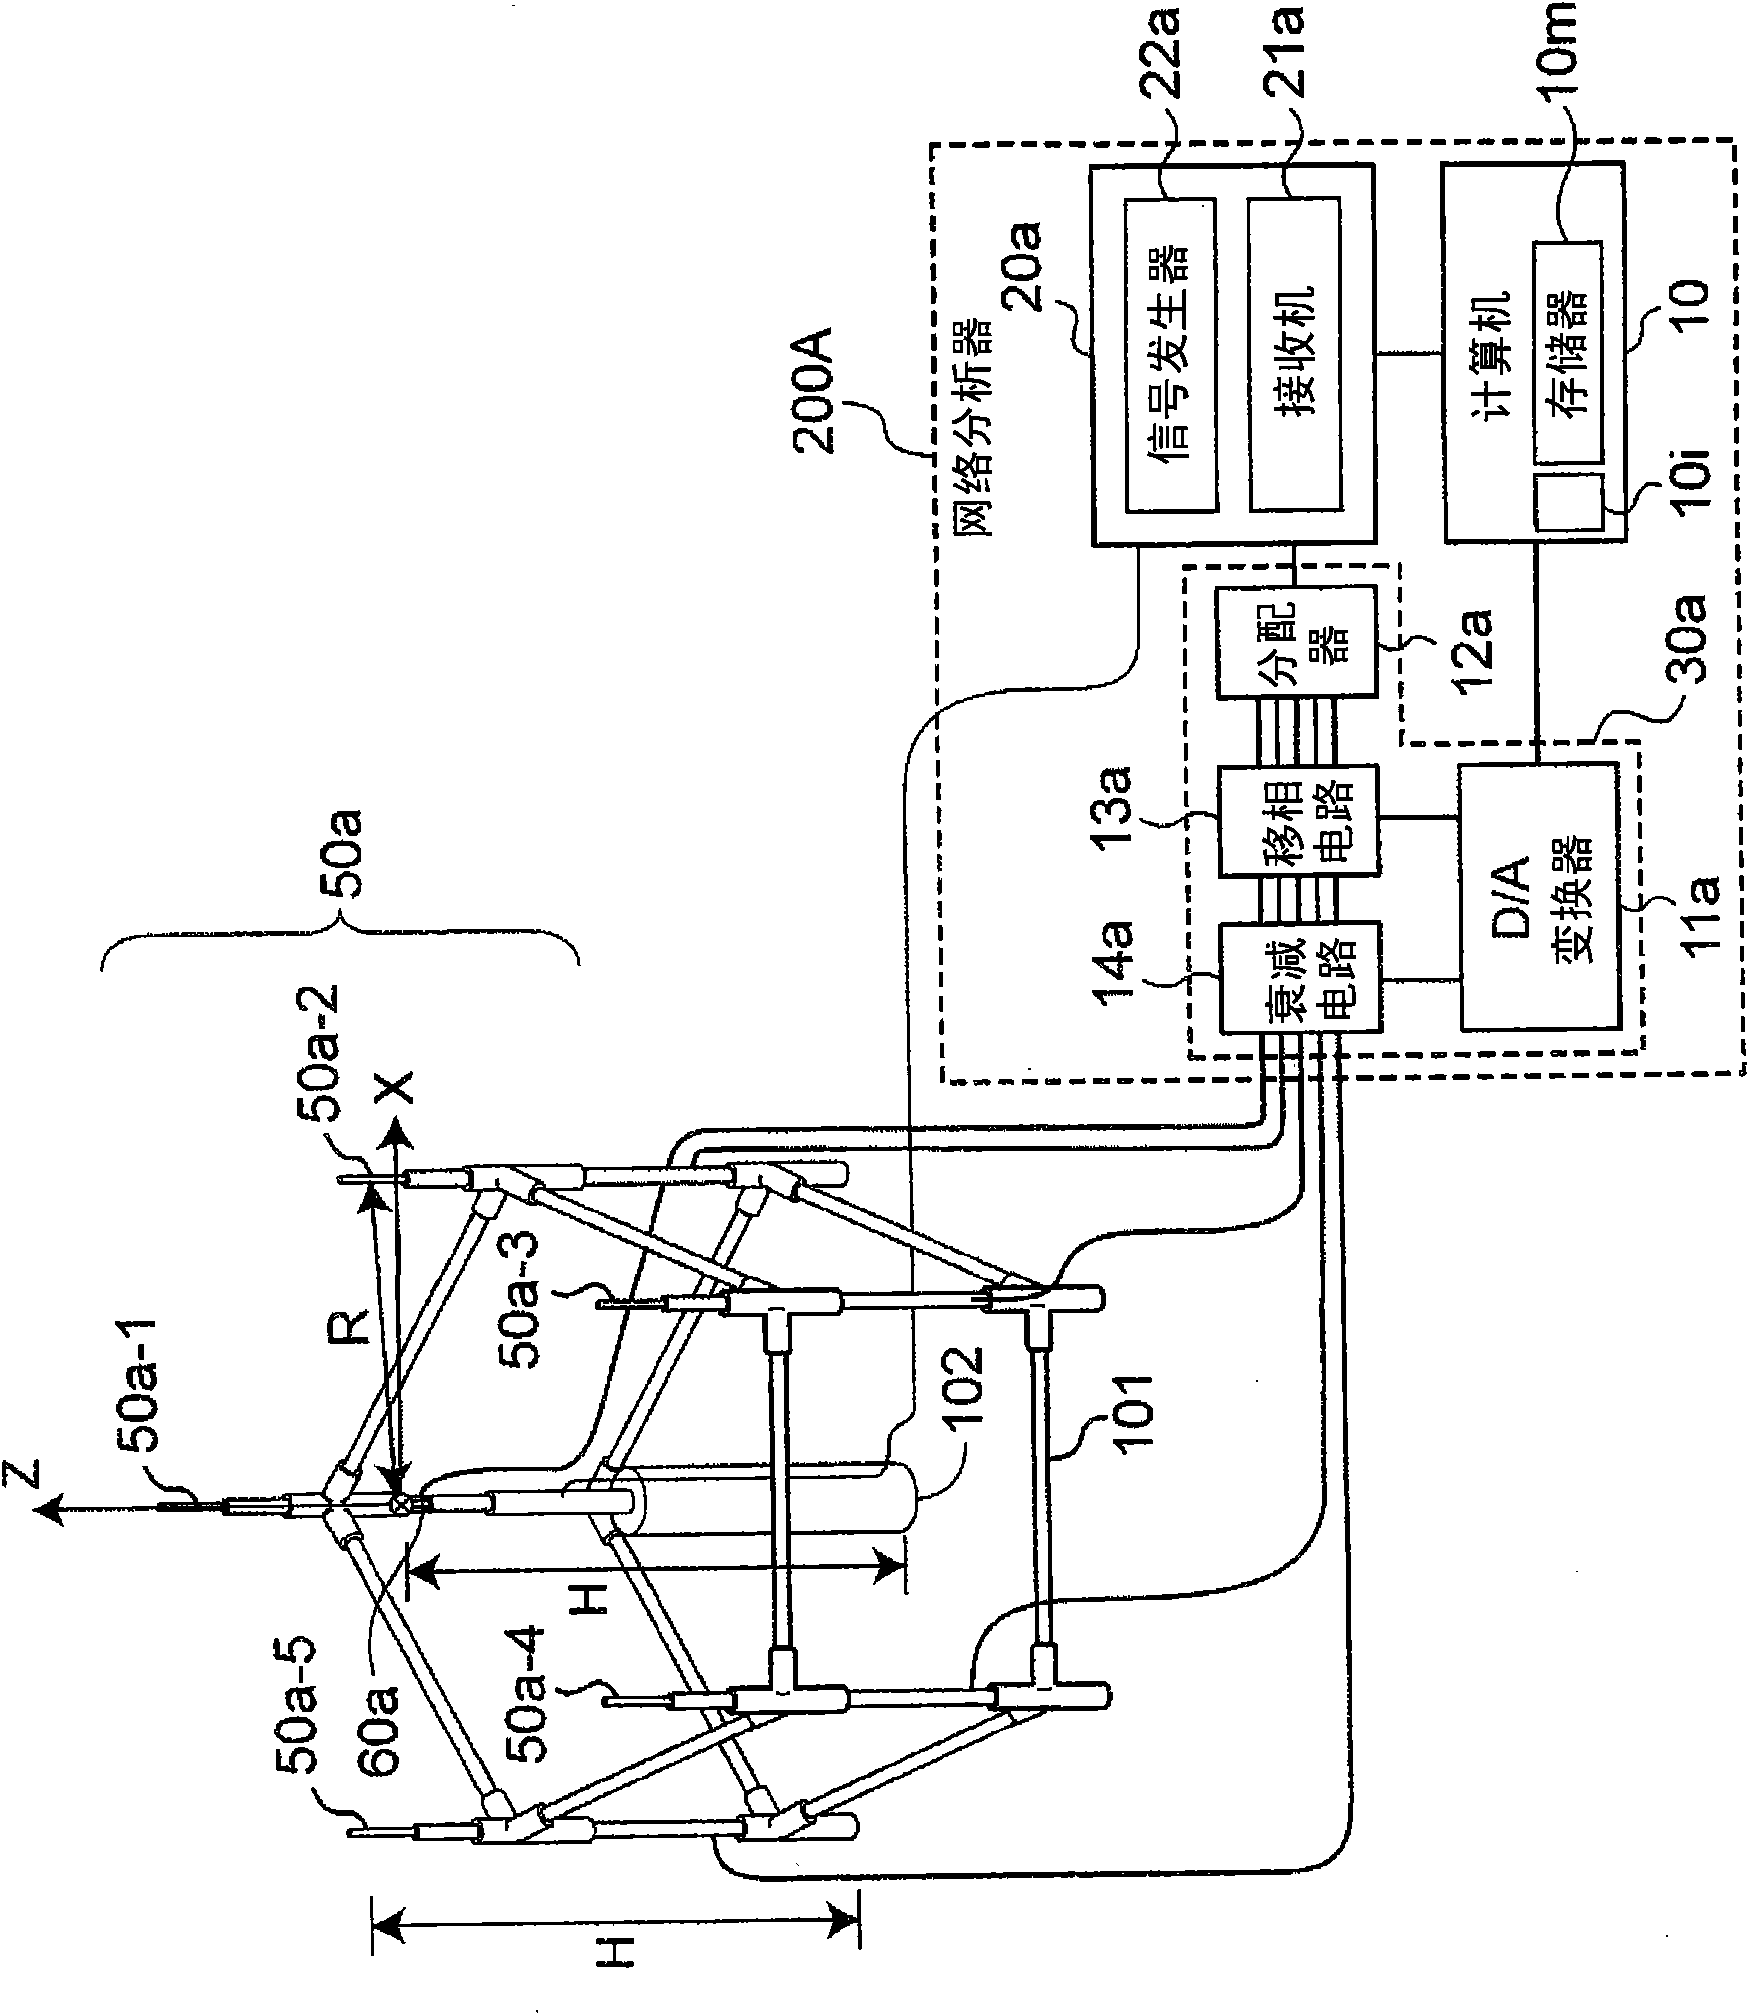 Antenna evaluation device and method